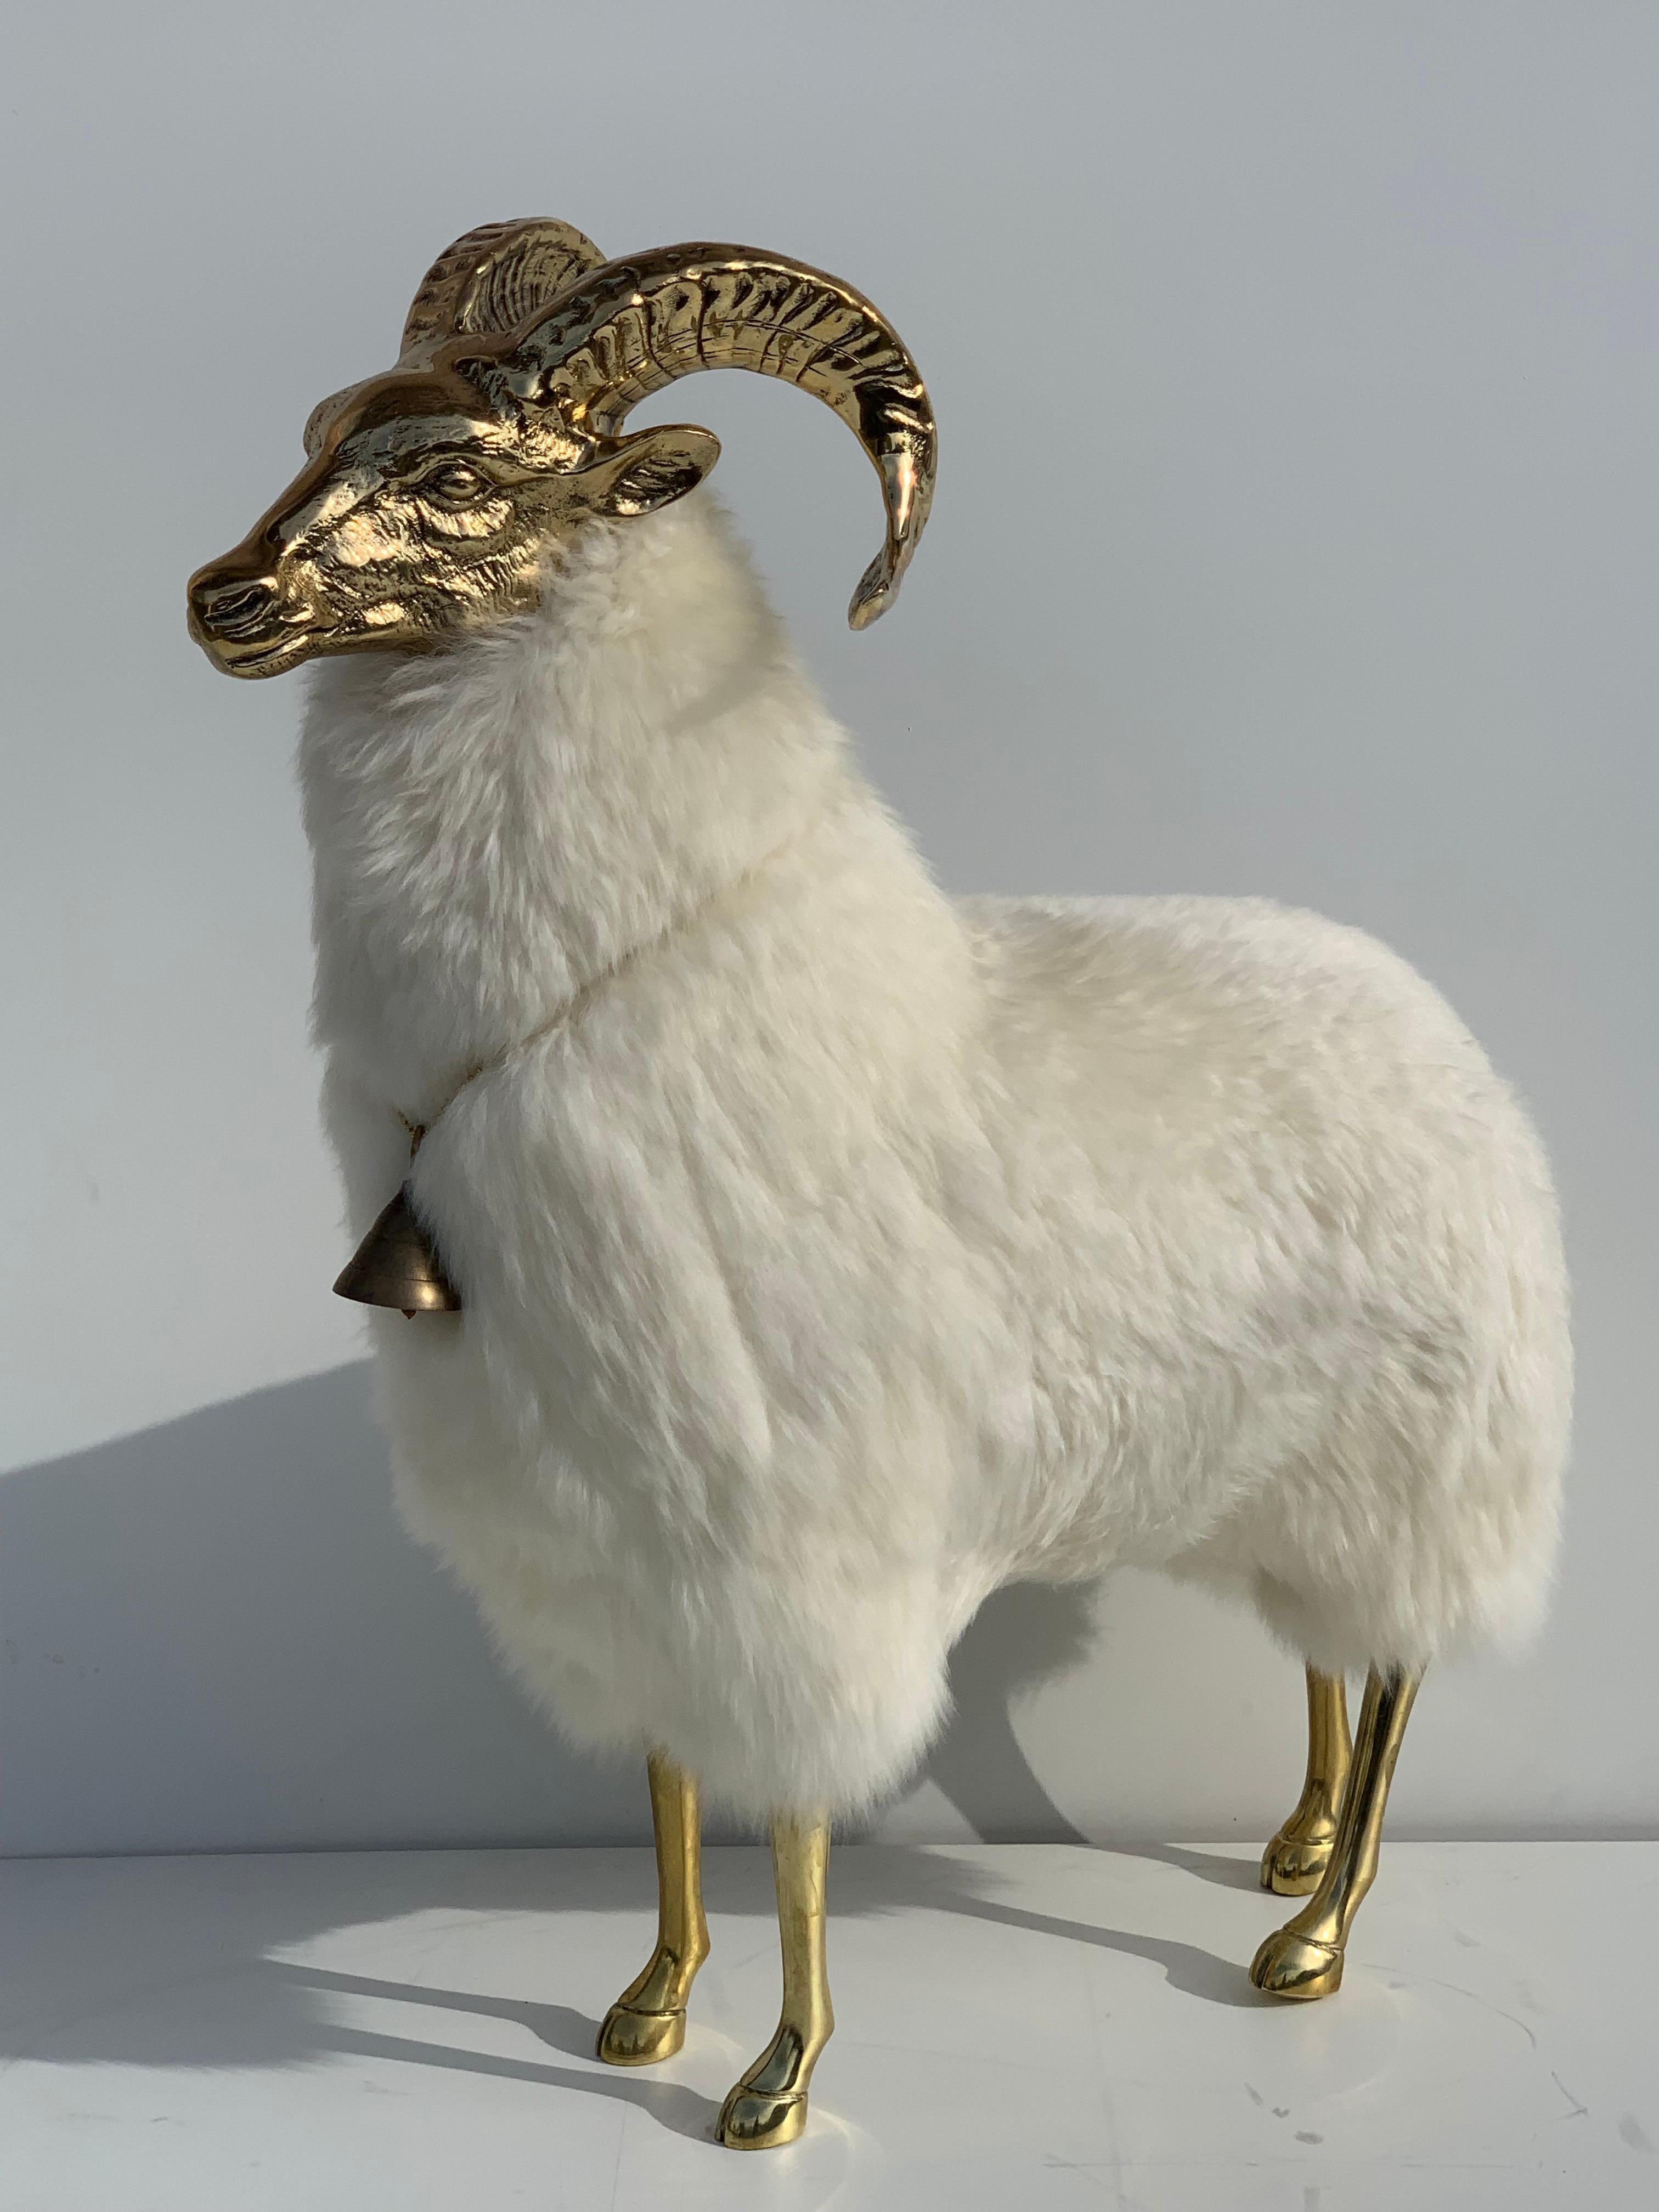 Brass mountain sheep goat or ram sculpture in the style of Lalanne. Solid brass head is vintage from 1970's and been polished. Body is new, made of wood and covered in real sheep fur.